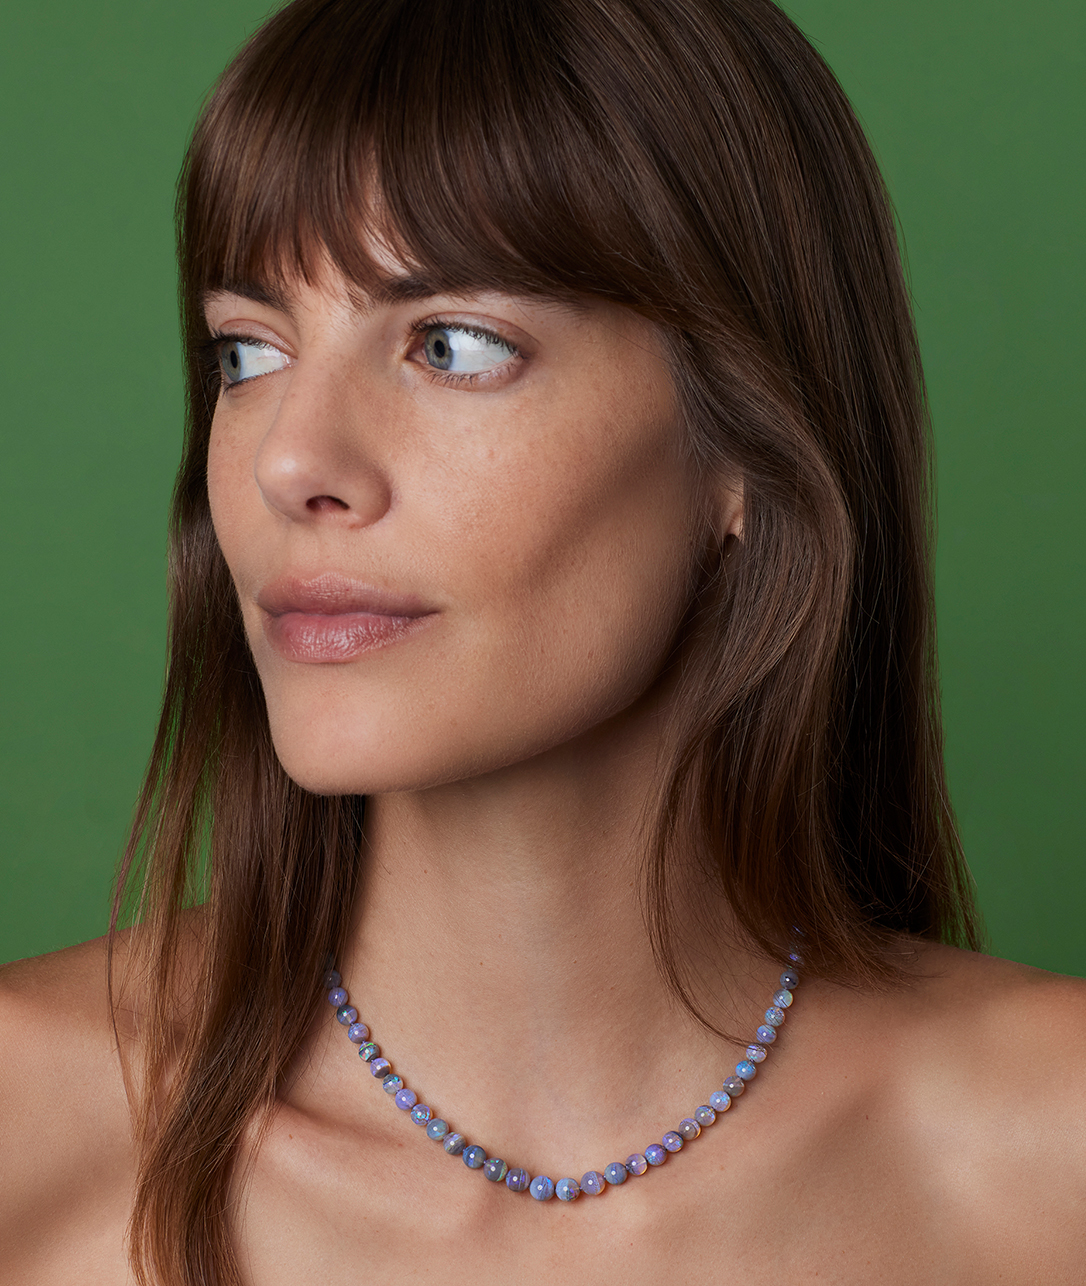 New Round Beaded Candy styles make for a necklace that's extra sweet.SHOP OPAL BEADED CANDY 